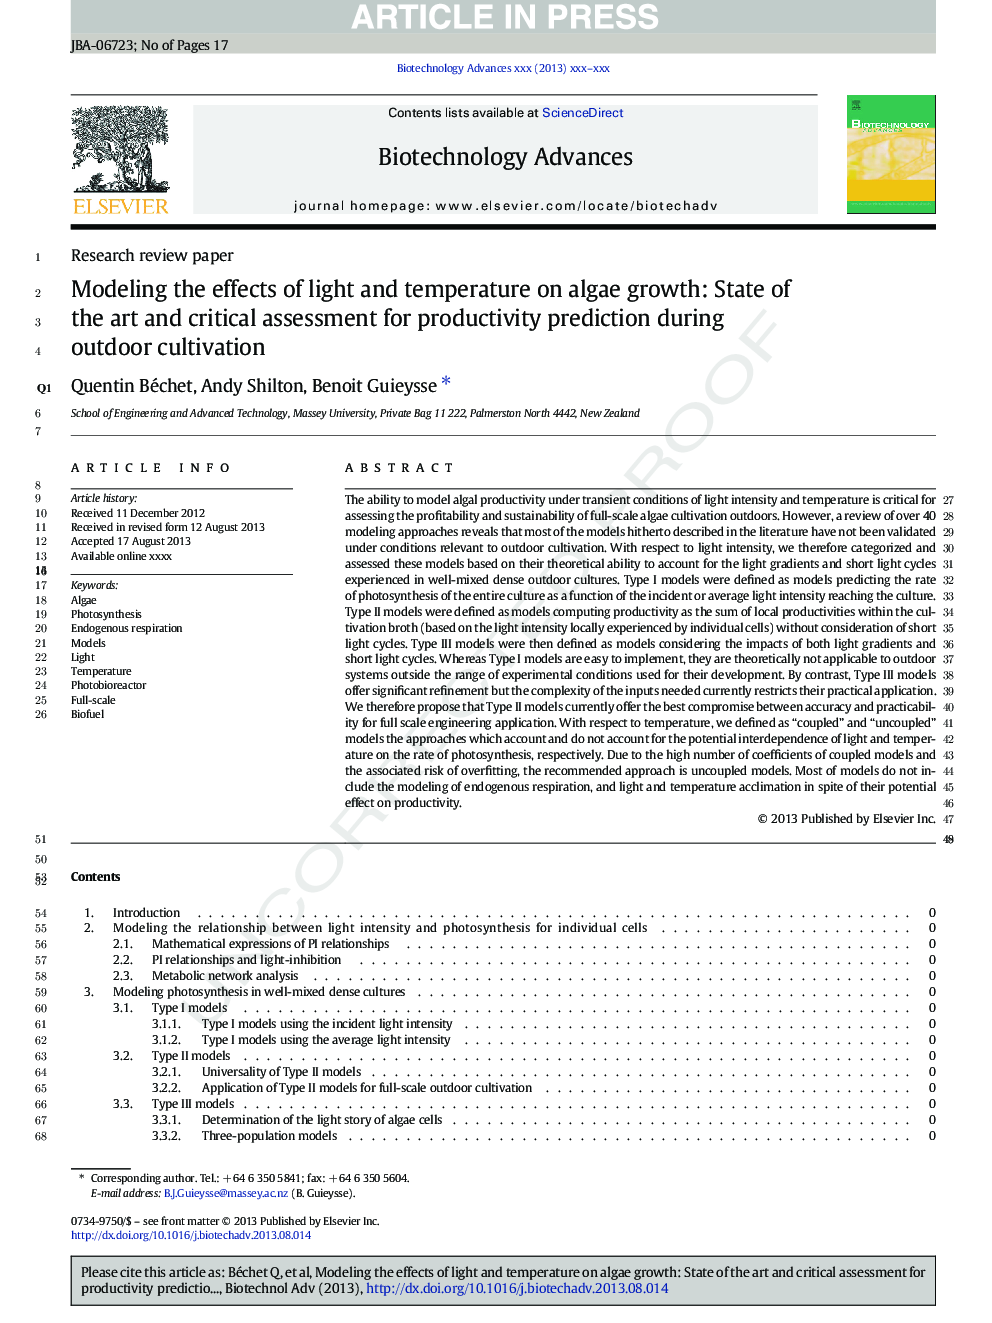 Modeling the effects of light and temperature on algae growth: State of the art and critical assessment for productivity prediction during outdoor cultivation